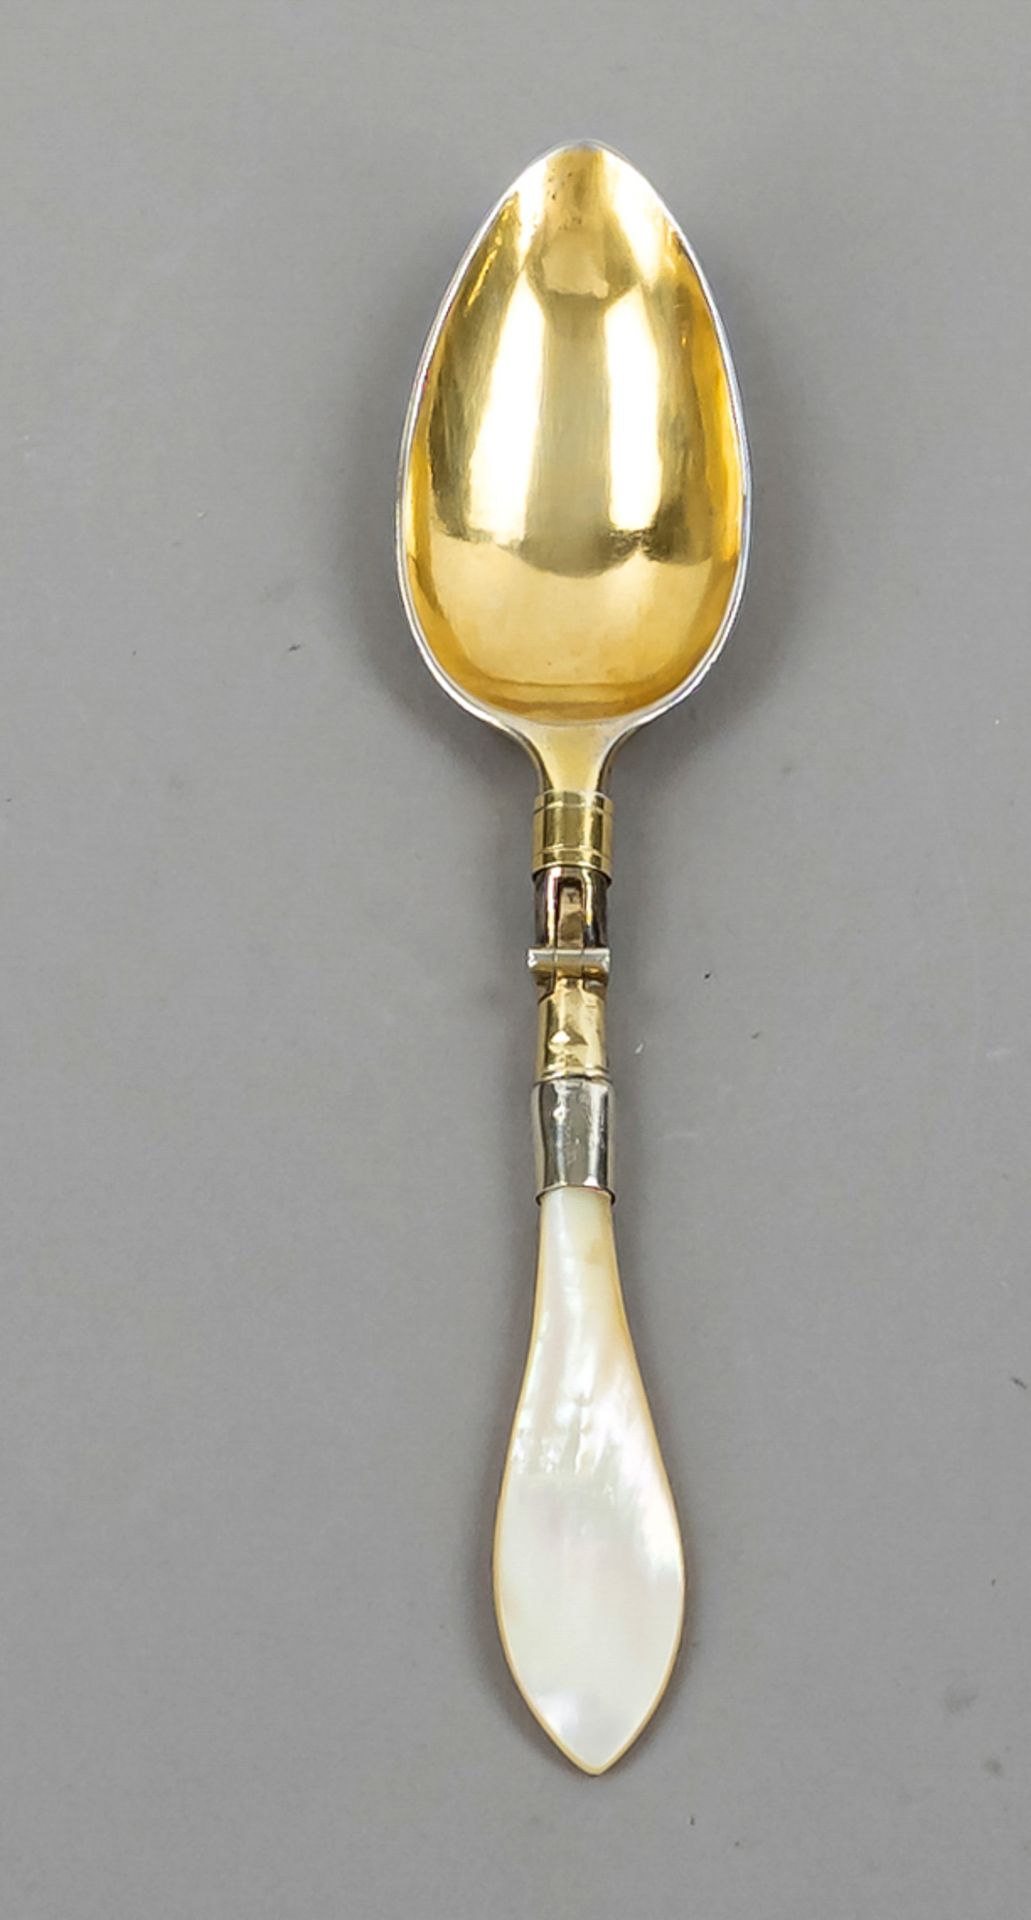 North German folding spoon, 18th/19th c., unmarked, silver predominantly gilt, pointed oval spoon,